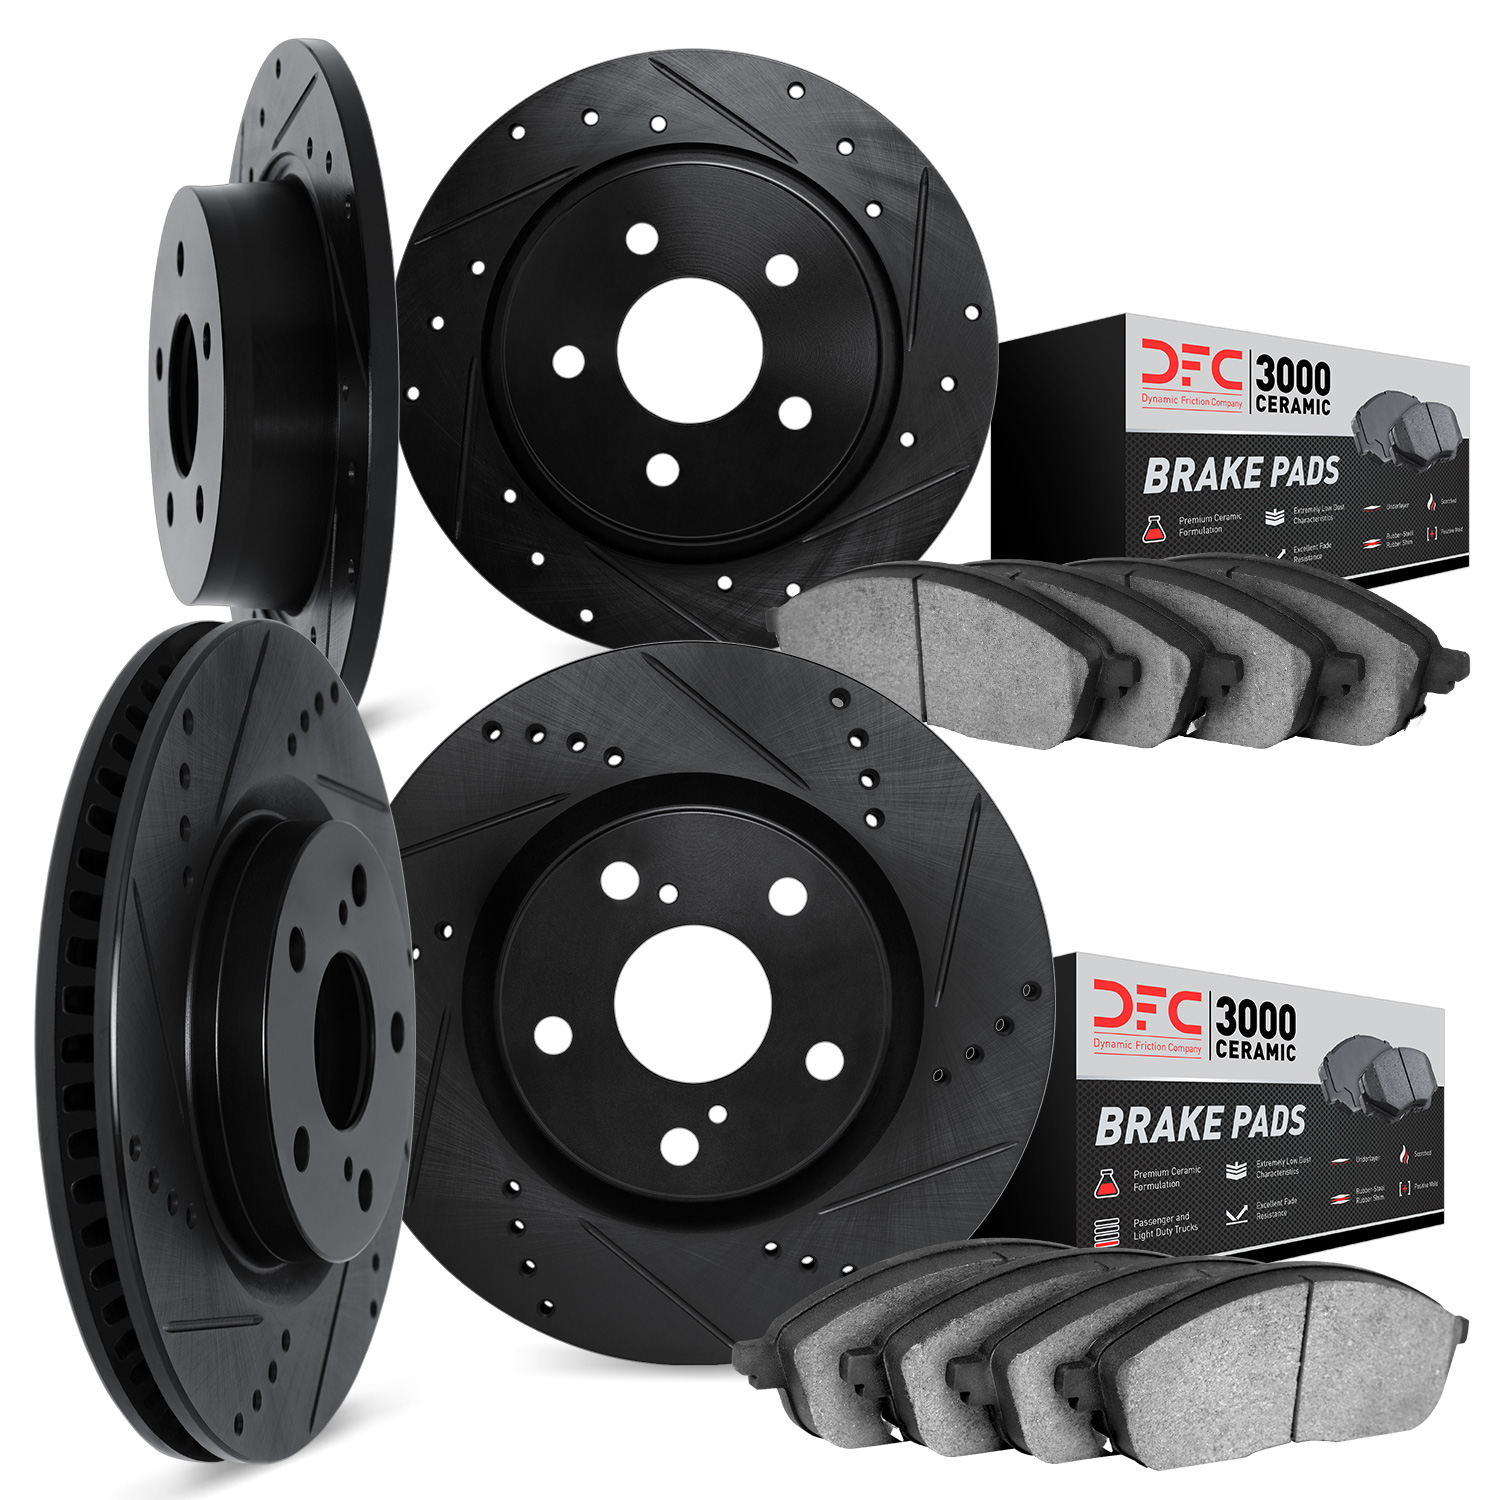 8304-40031 Drilled/Slotted Brake Rotors with 3000-Series Ceramic Brake Pads Kit [Black], Fits Select Mopar, Position: Front and